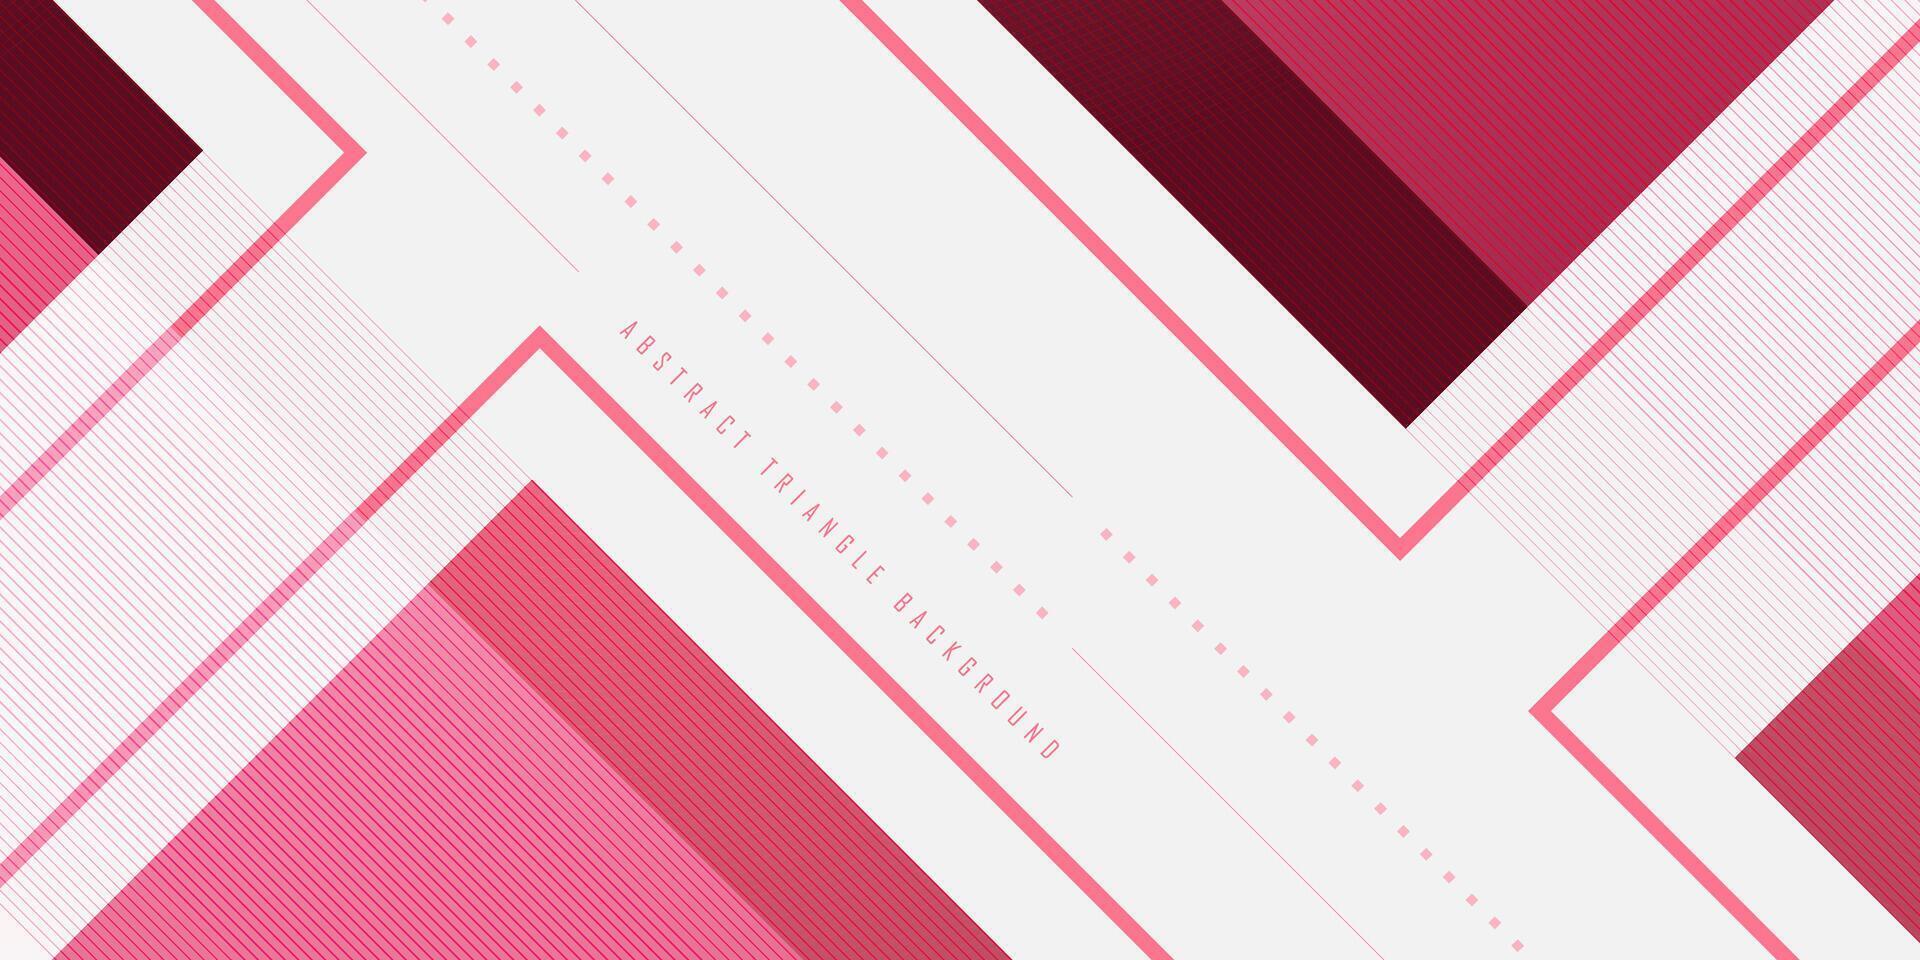 Bright red square template abstract background vector with overlap layer on white color design. Eps10 vector